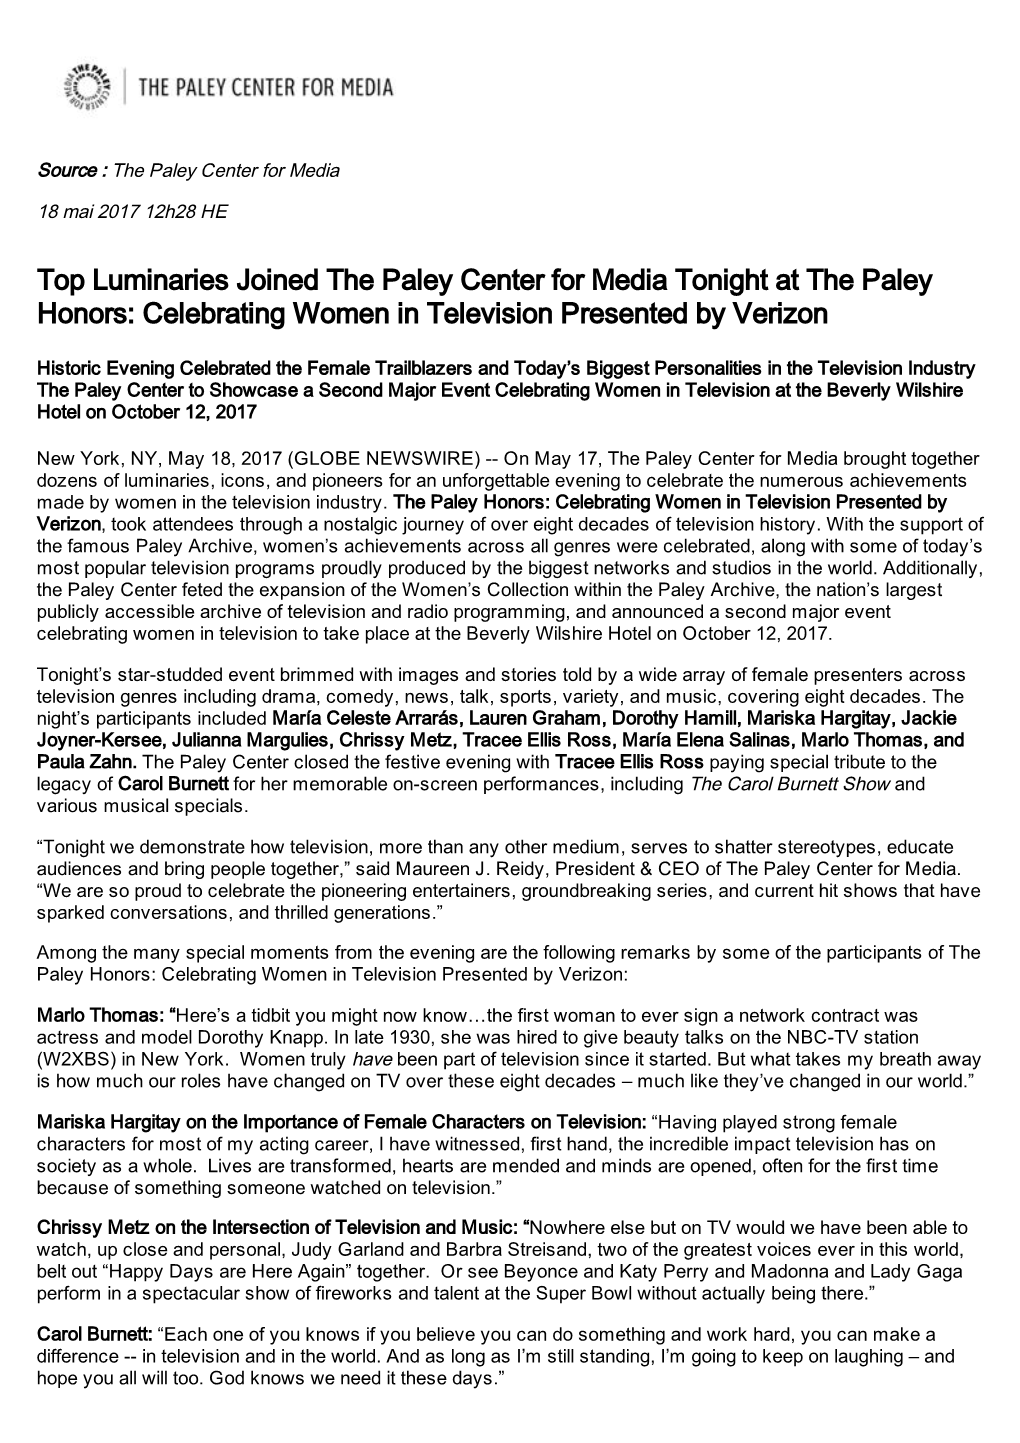 Top Luminaries Joined the Paley Center for Media Tonight at the Paley Honors: Celebrating Women in Television Presented by Verizon